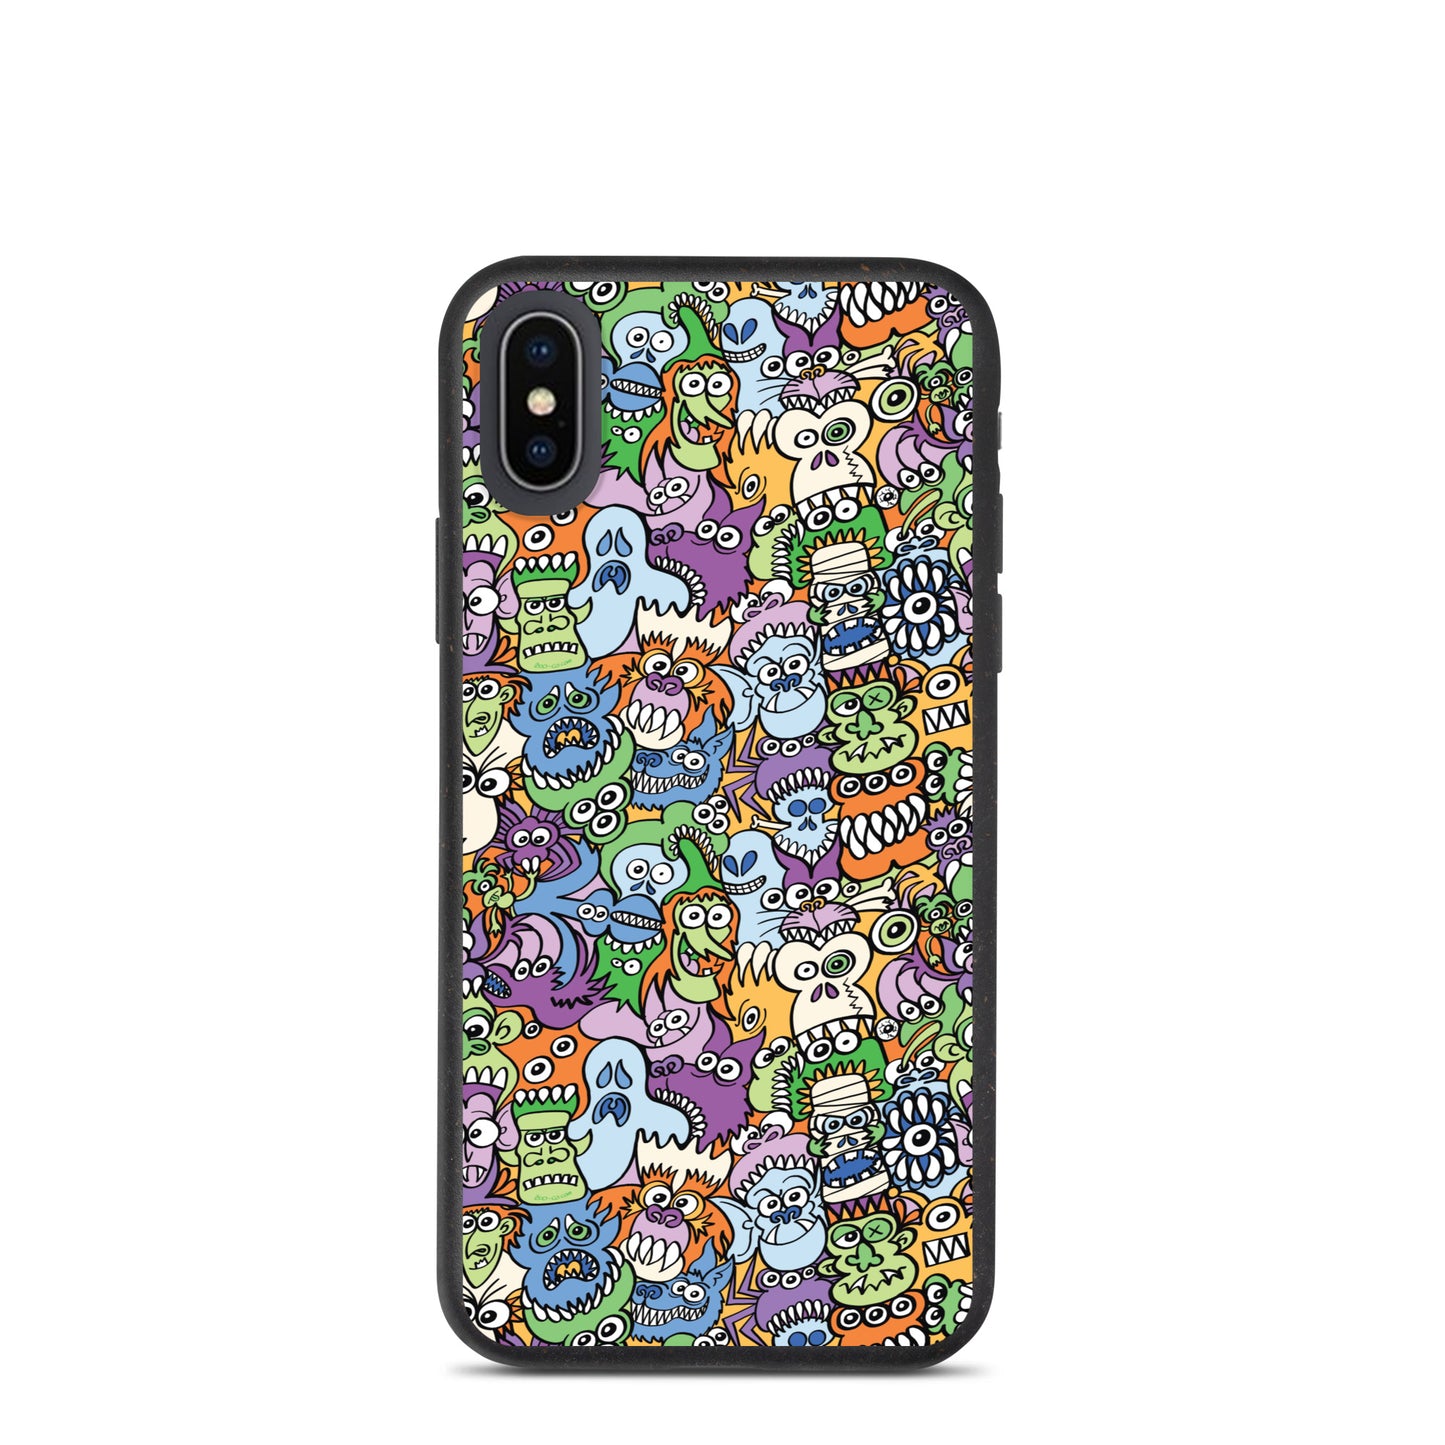 All the spooky Halloween monsters in a pattern design Speckled iPhone case. iphone x. iphone xs